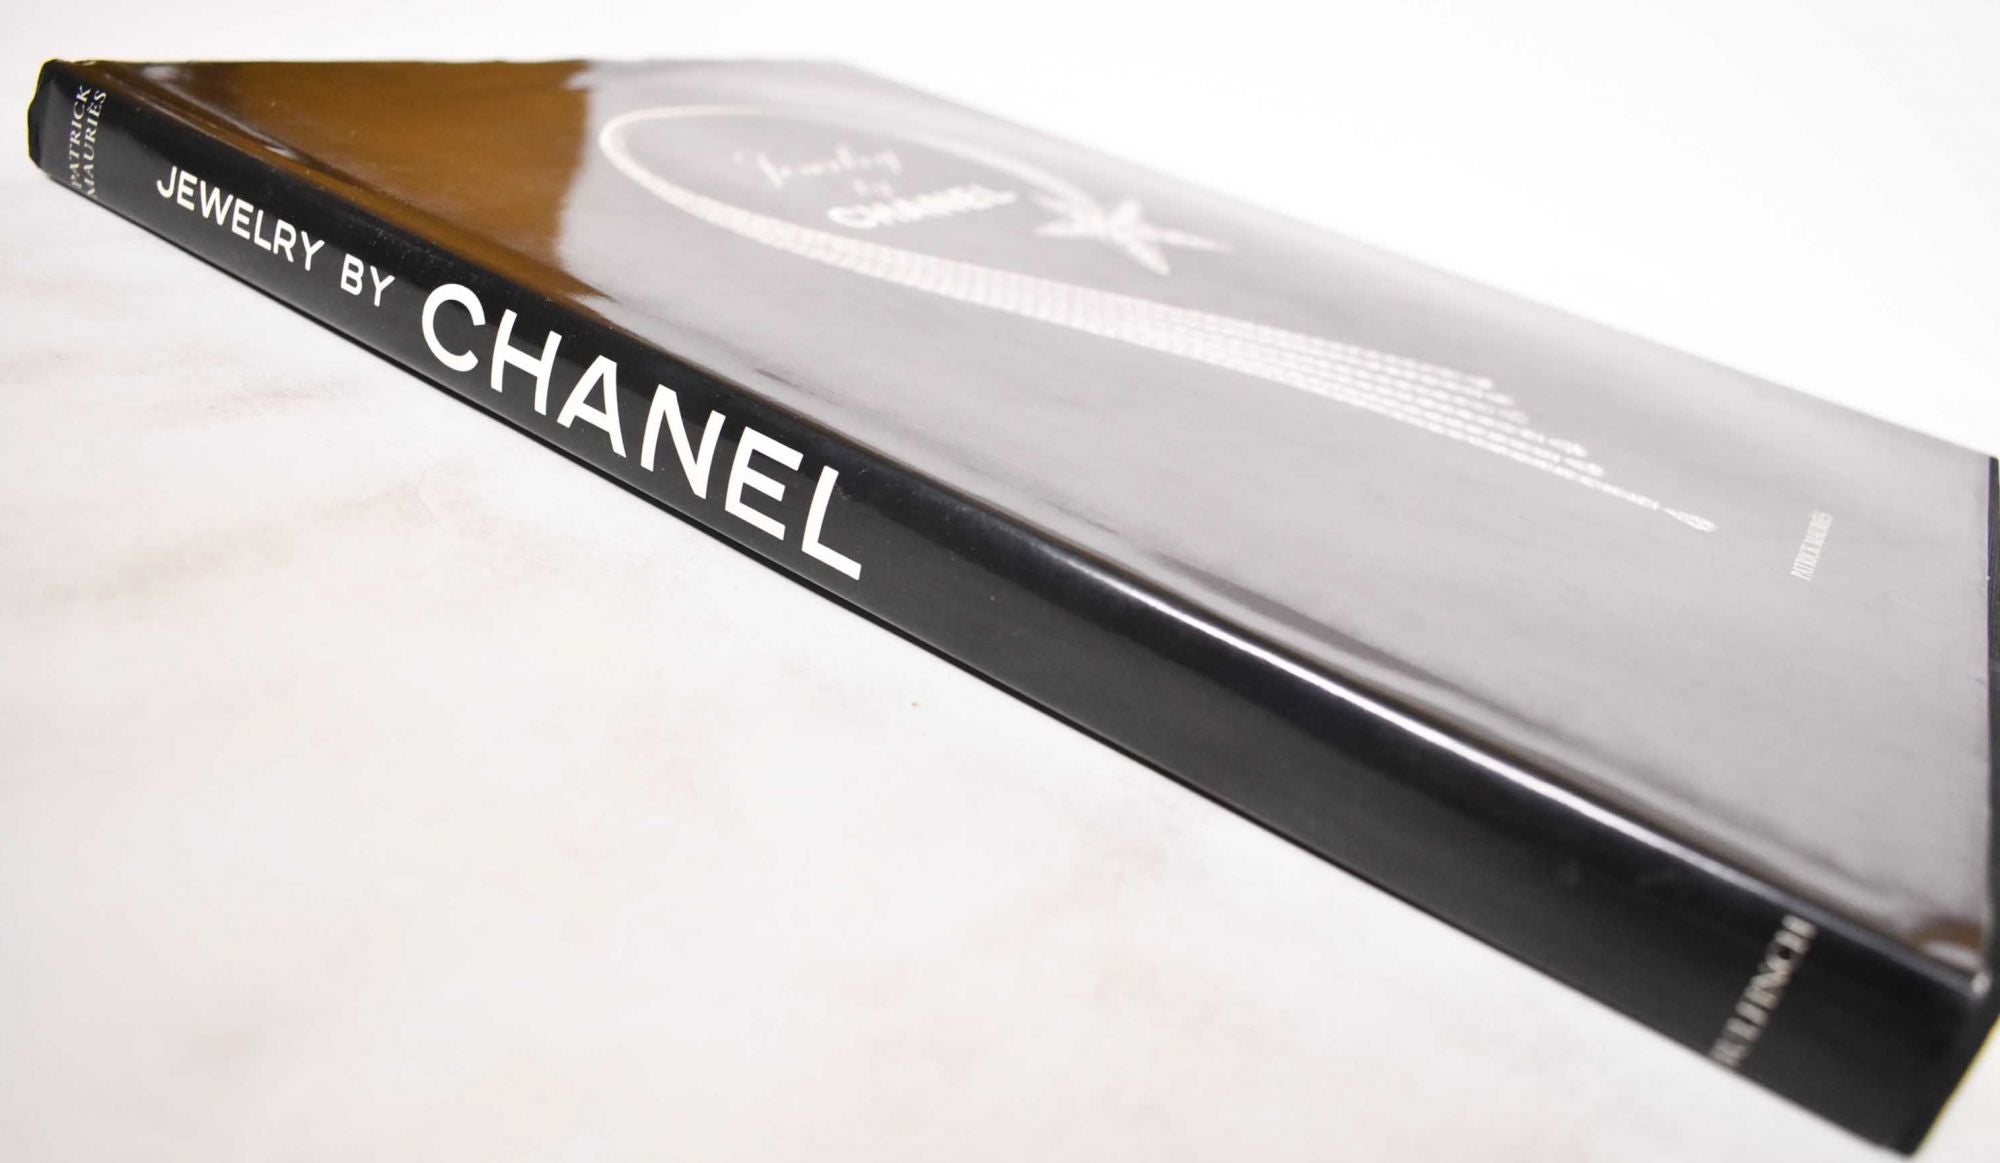 Chanel Jewelry [Book]